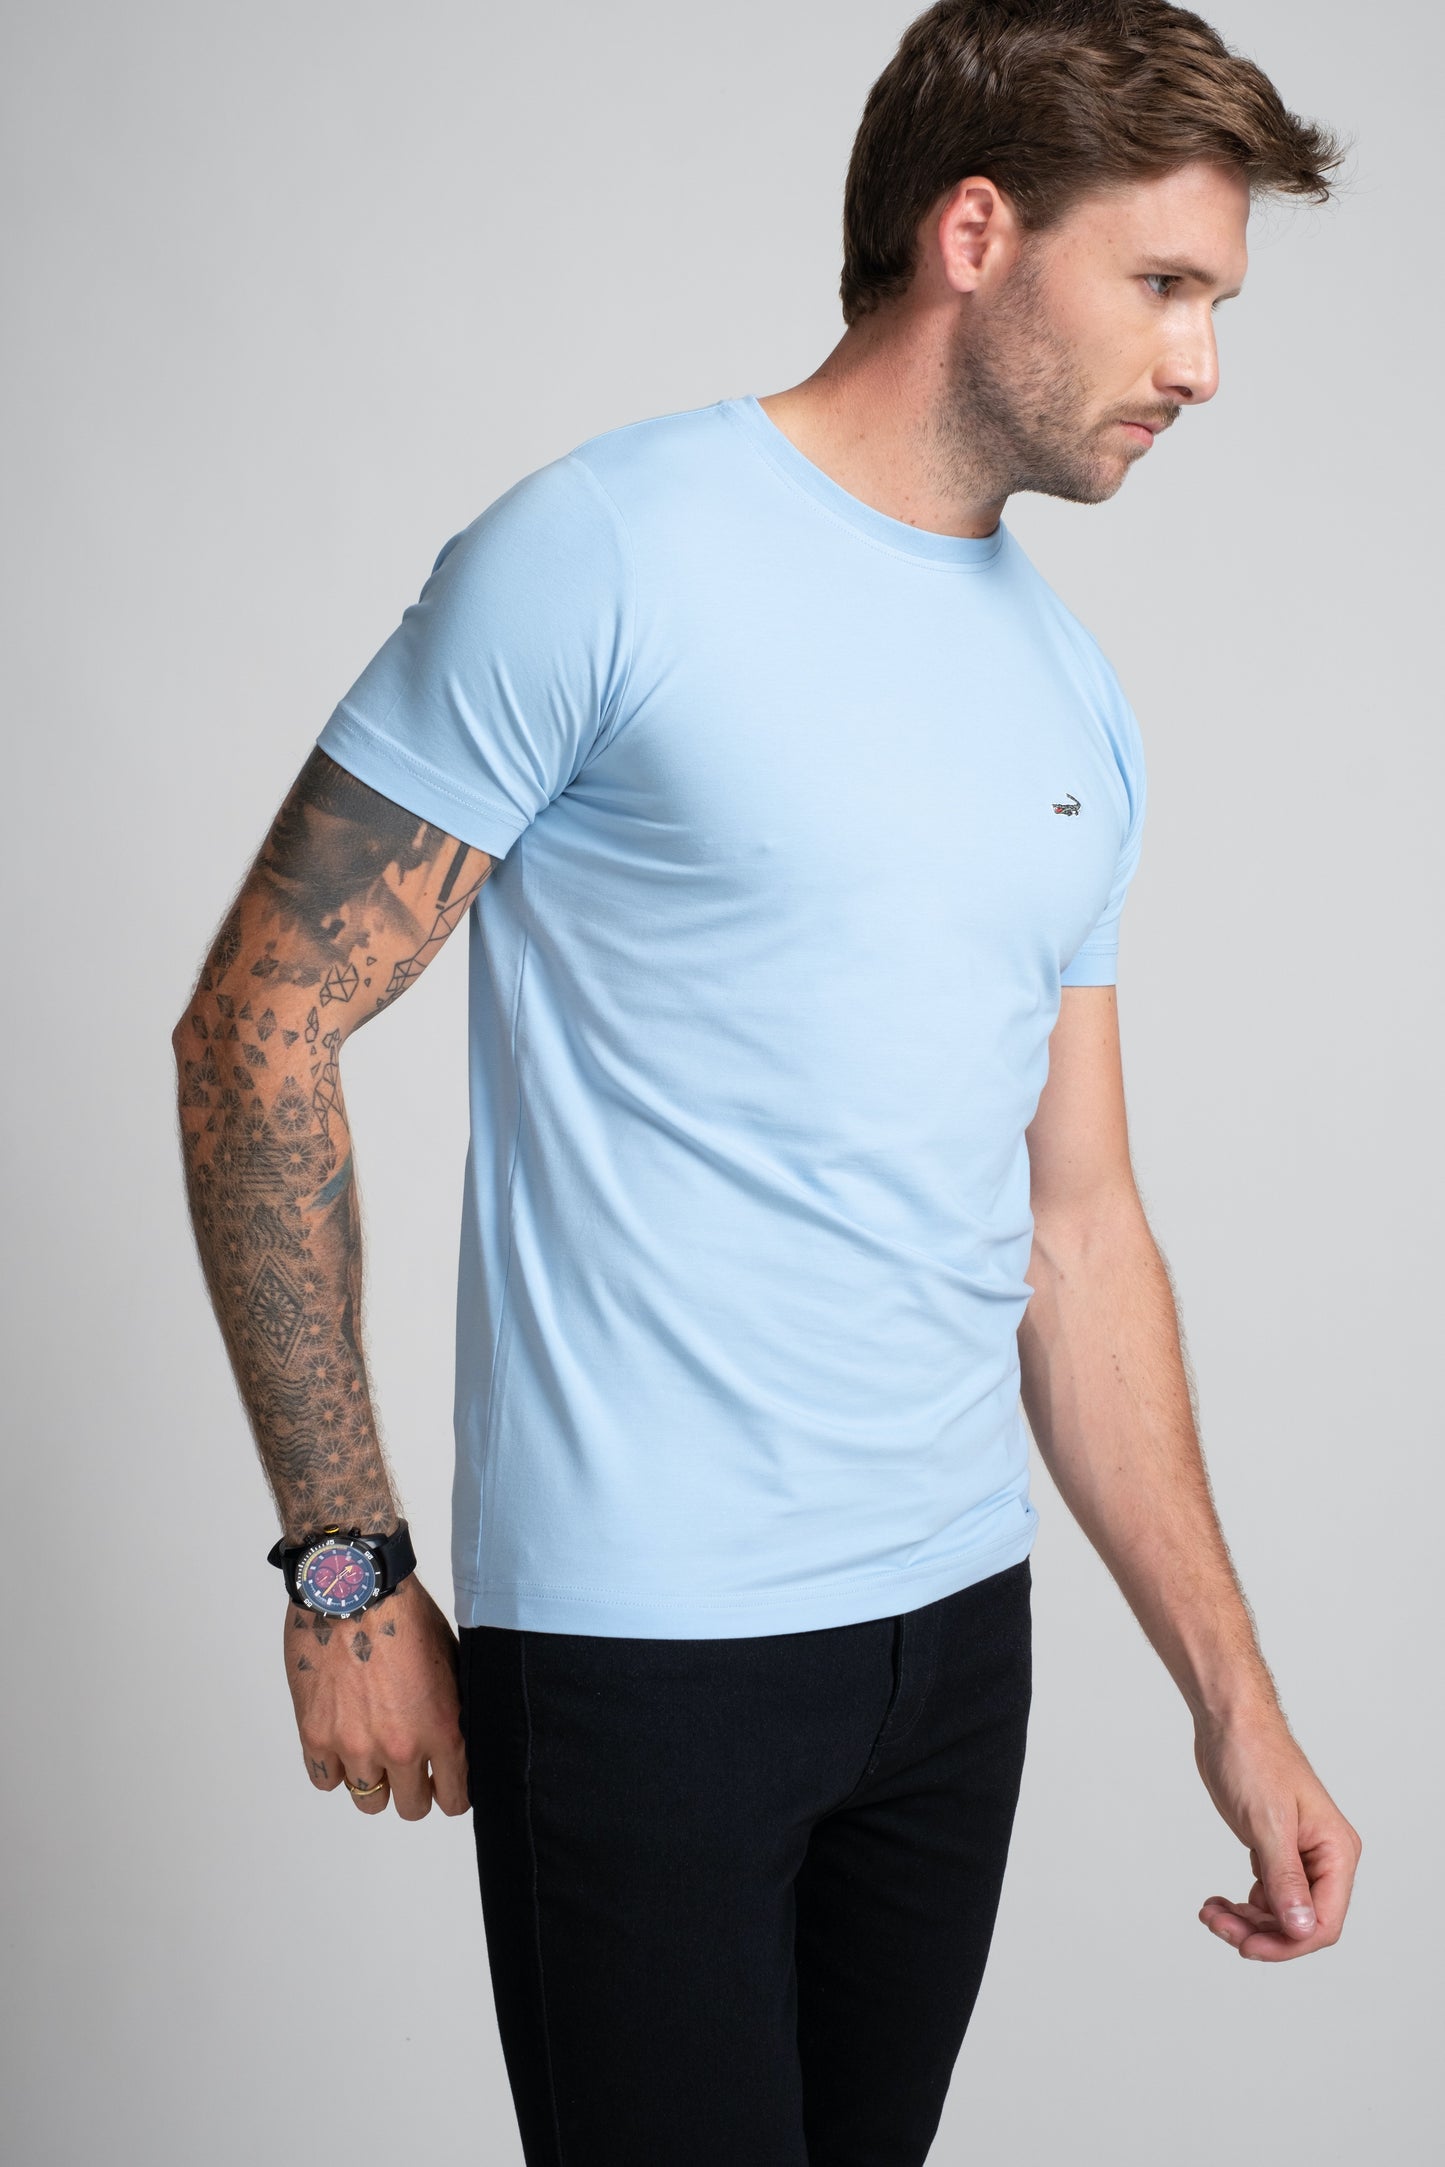 Action Fit Short sleeves-CasualCrew Neck - Blue Bell